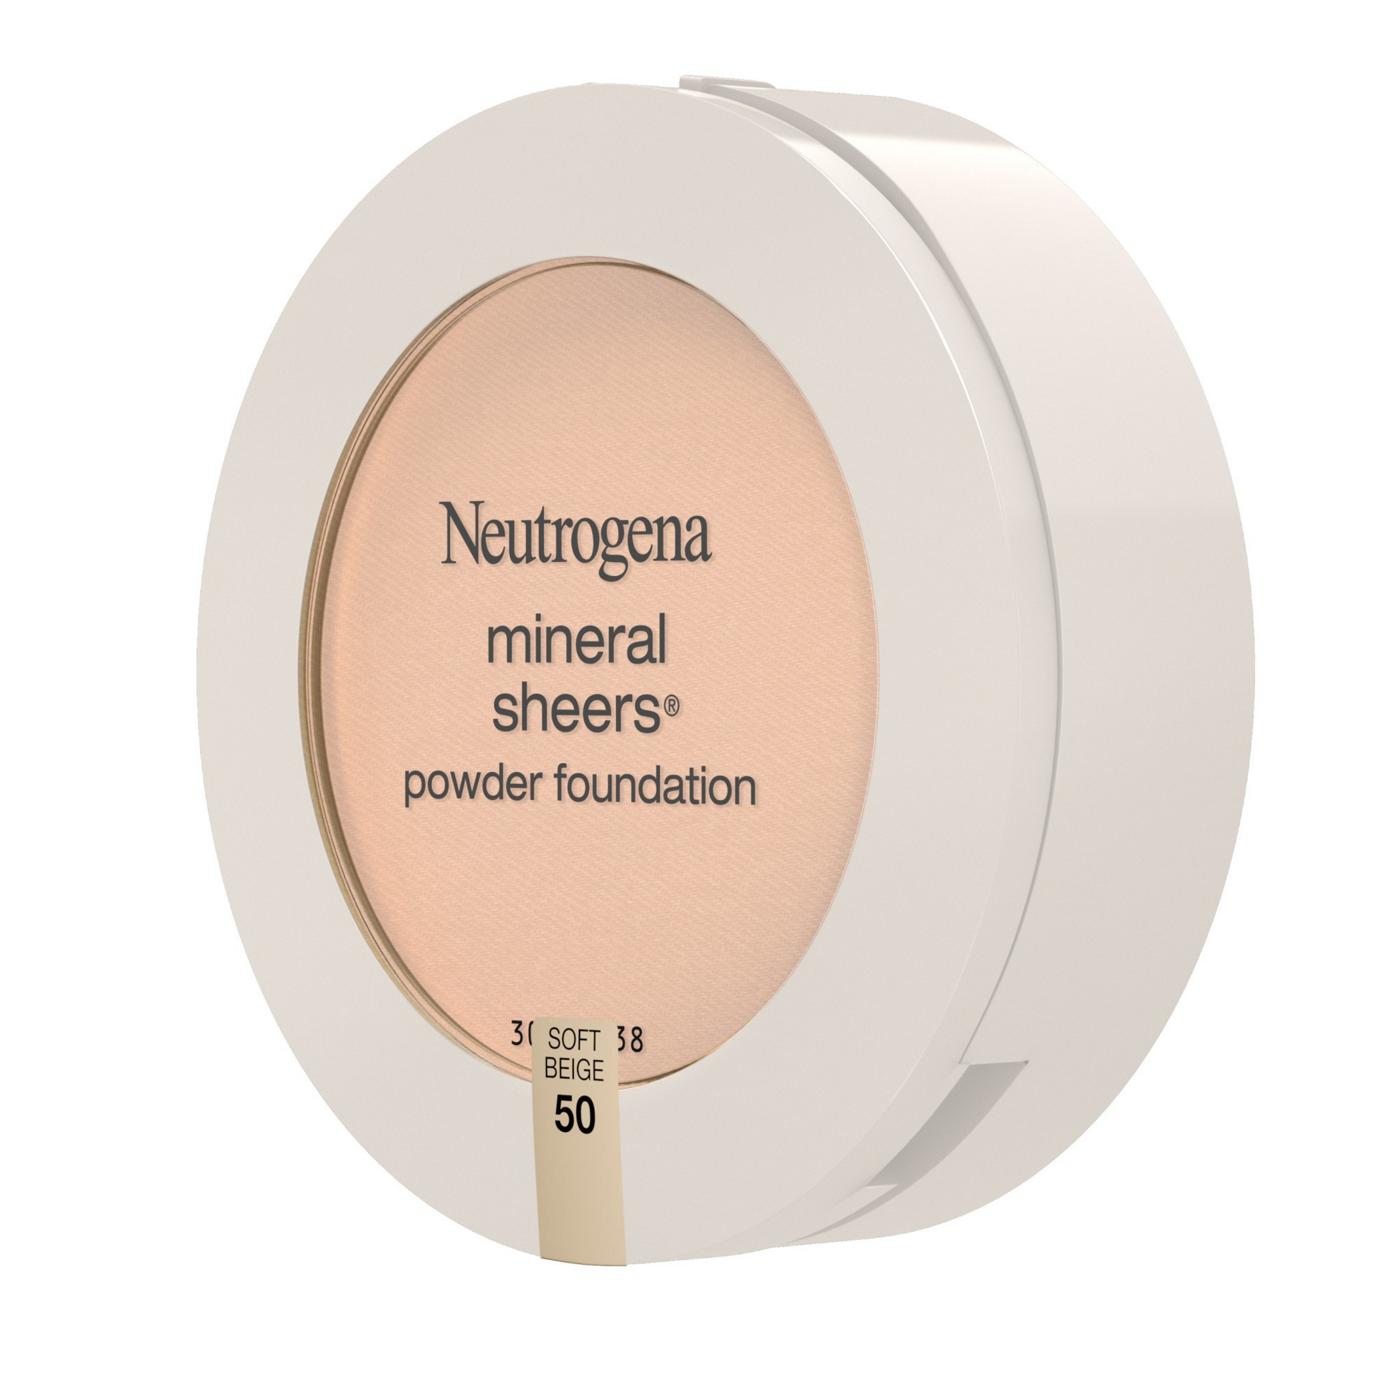 Neutrogena Mineral Sheers Compact Powder Foundation 50 Soft Beige; image 5 of 6